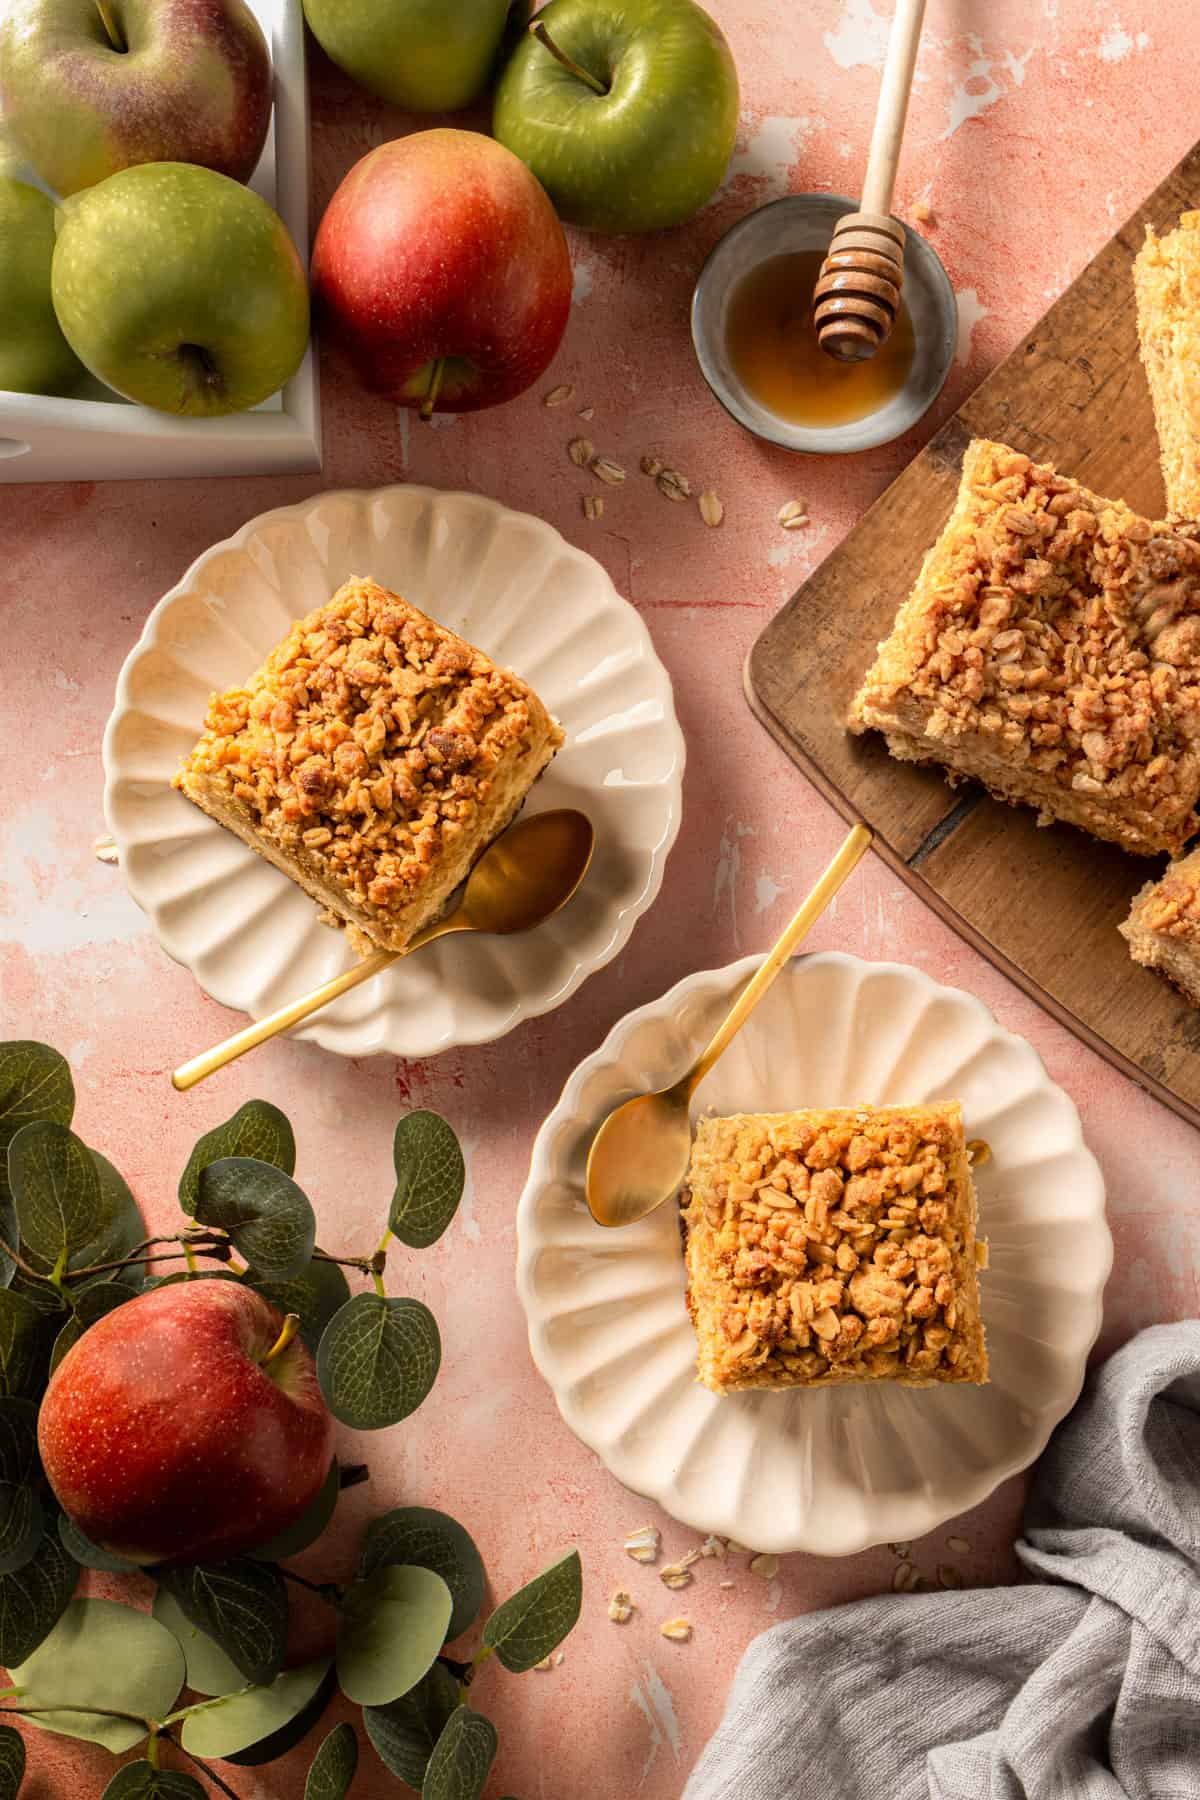 Two slices of apple crumble tray bake cake on plates, surrounded by apples